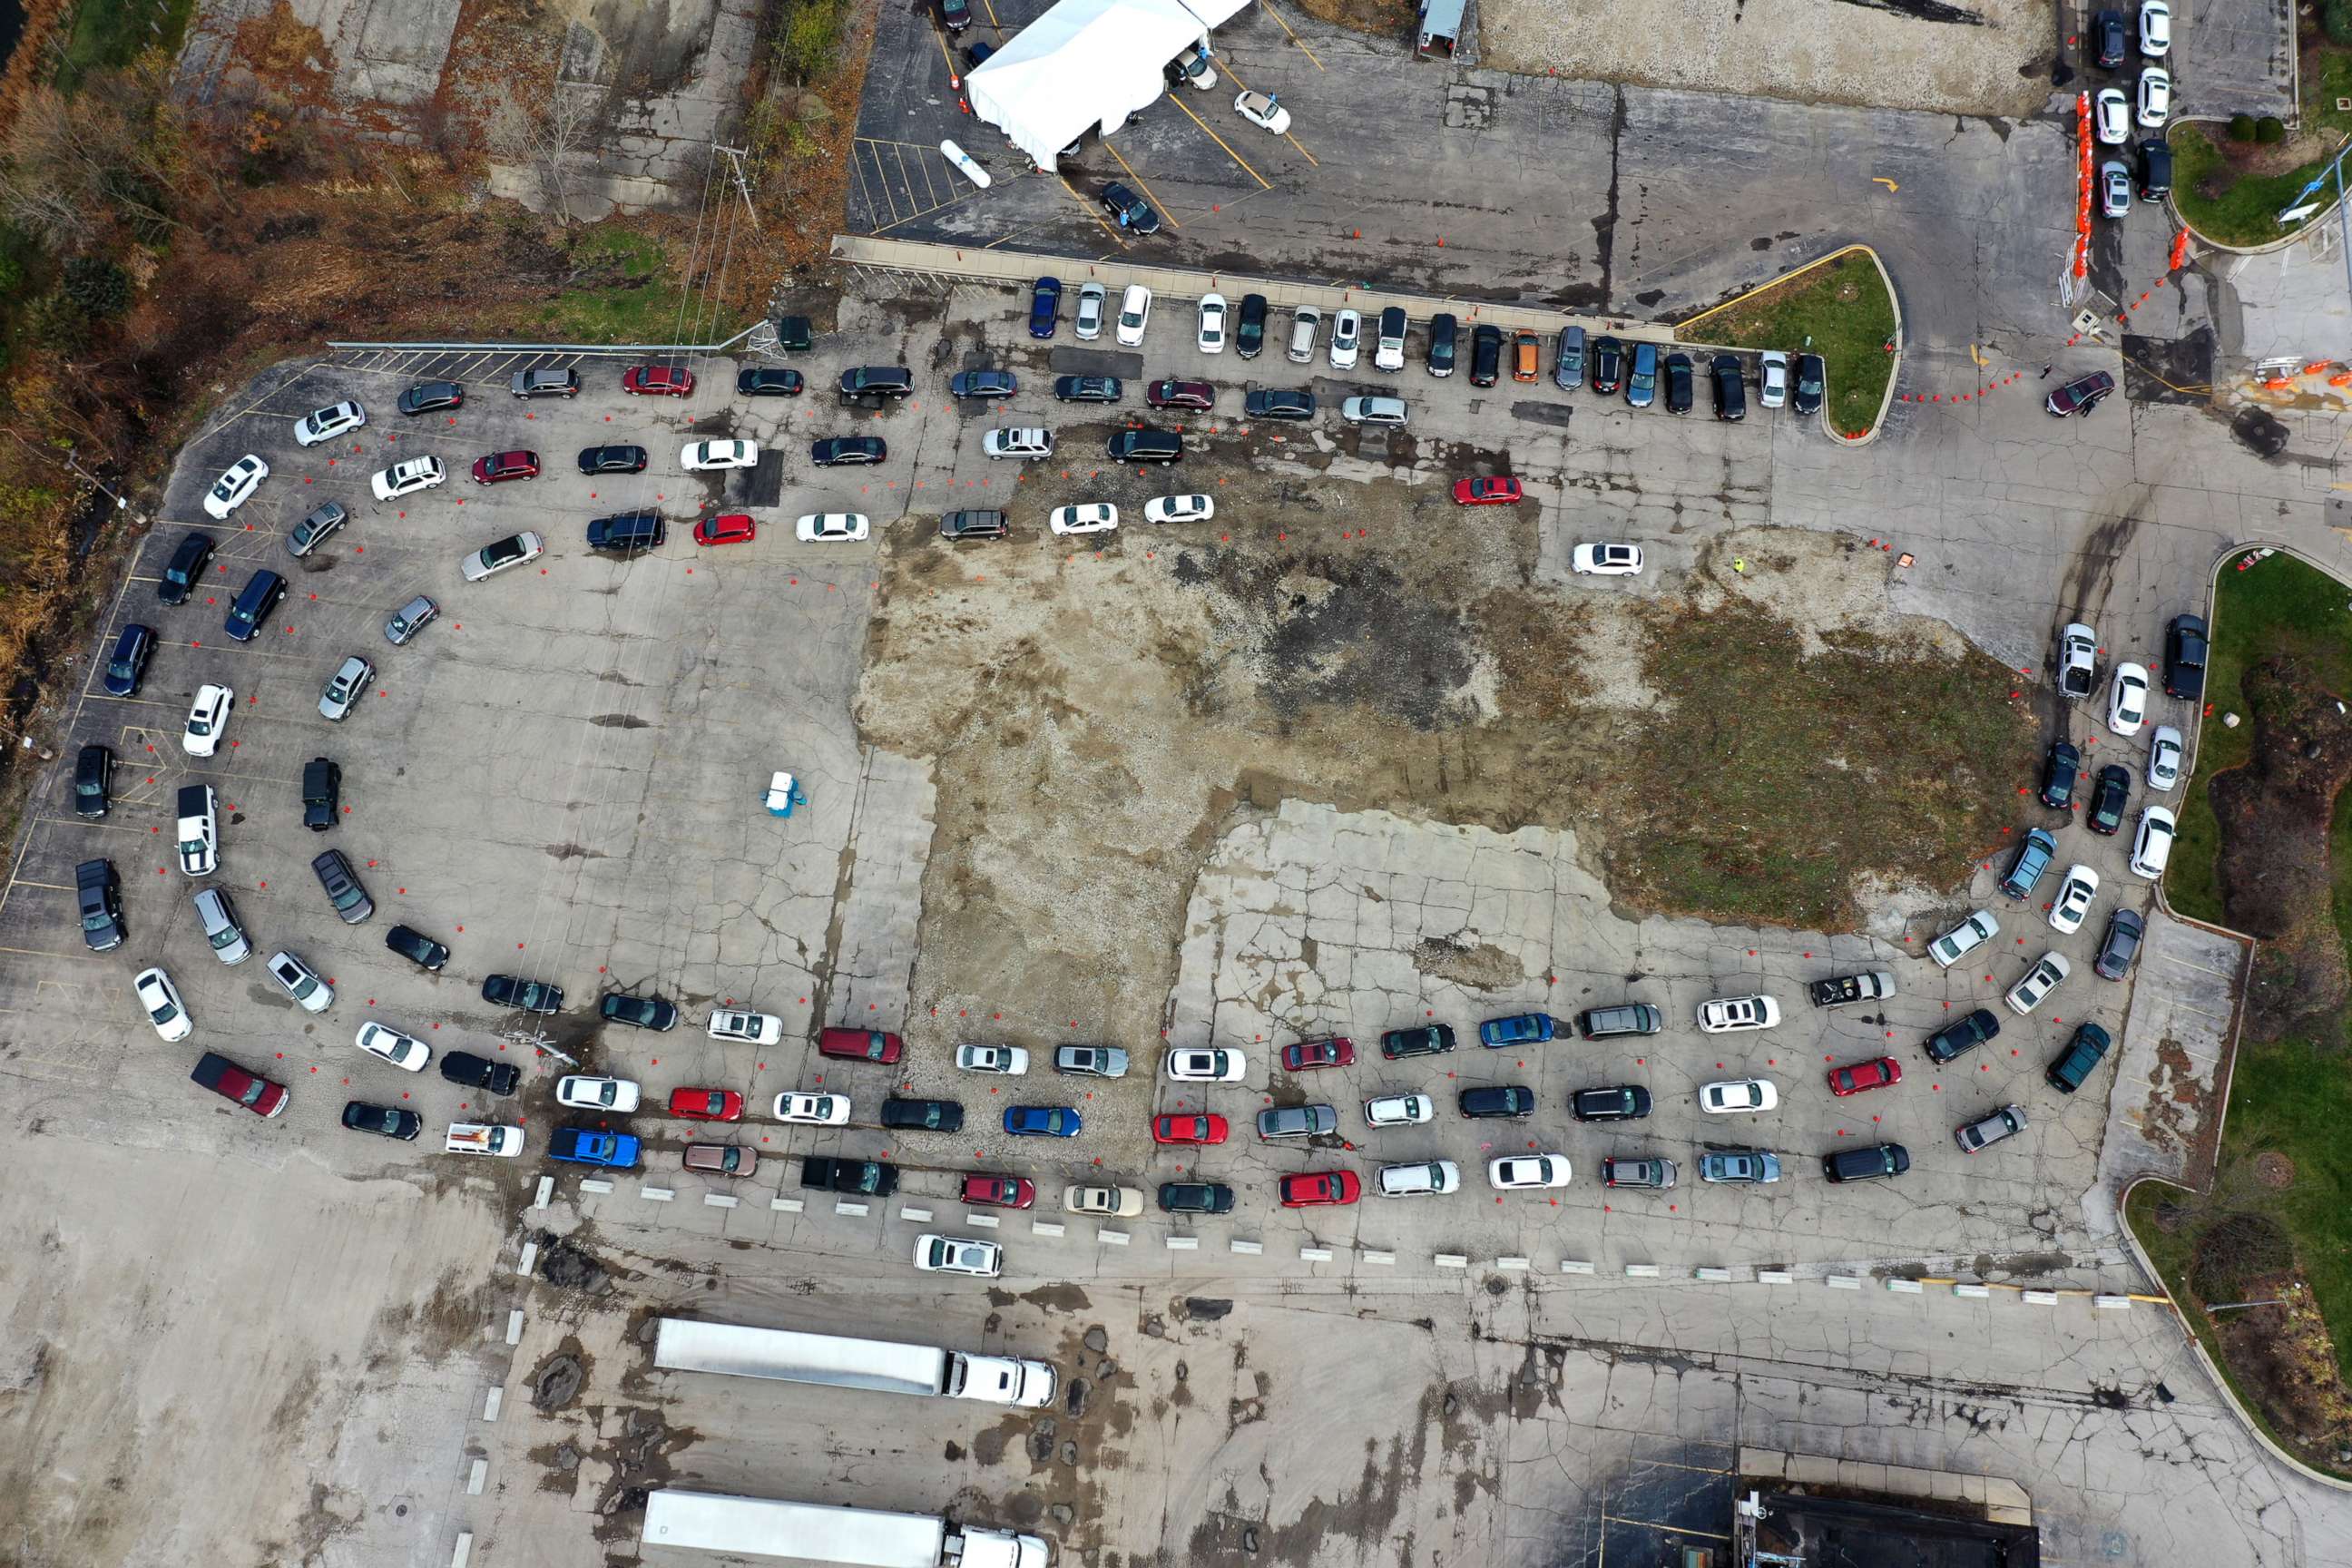 PHOTO: Residents in cars wait in line at a drive-up COVID-19 test site on Nov. 13, 2020 in Aurora, Illinois.